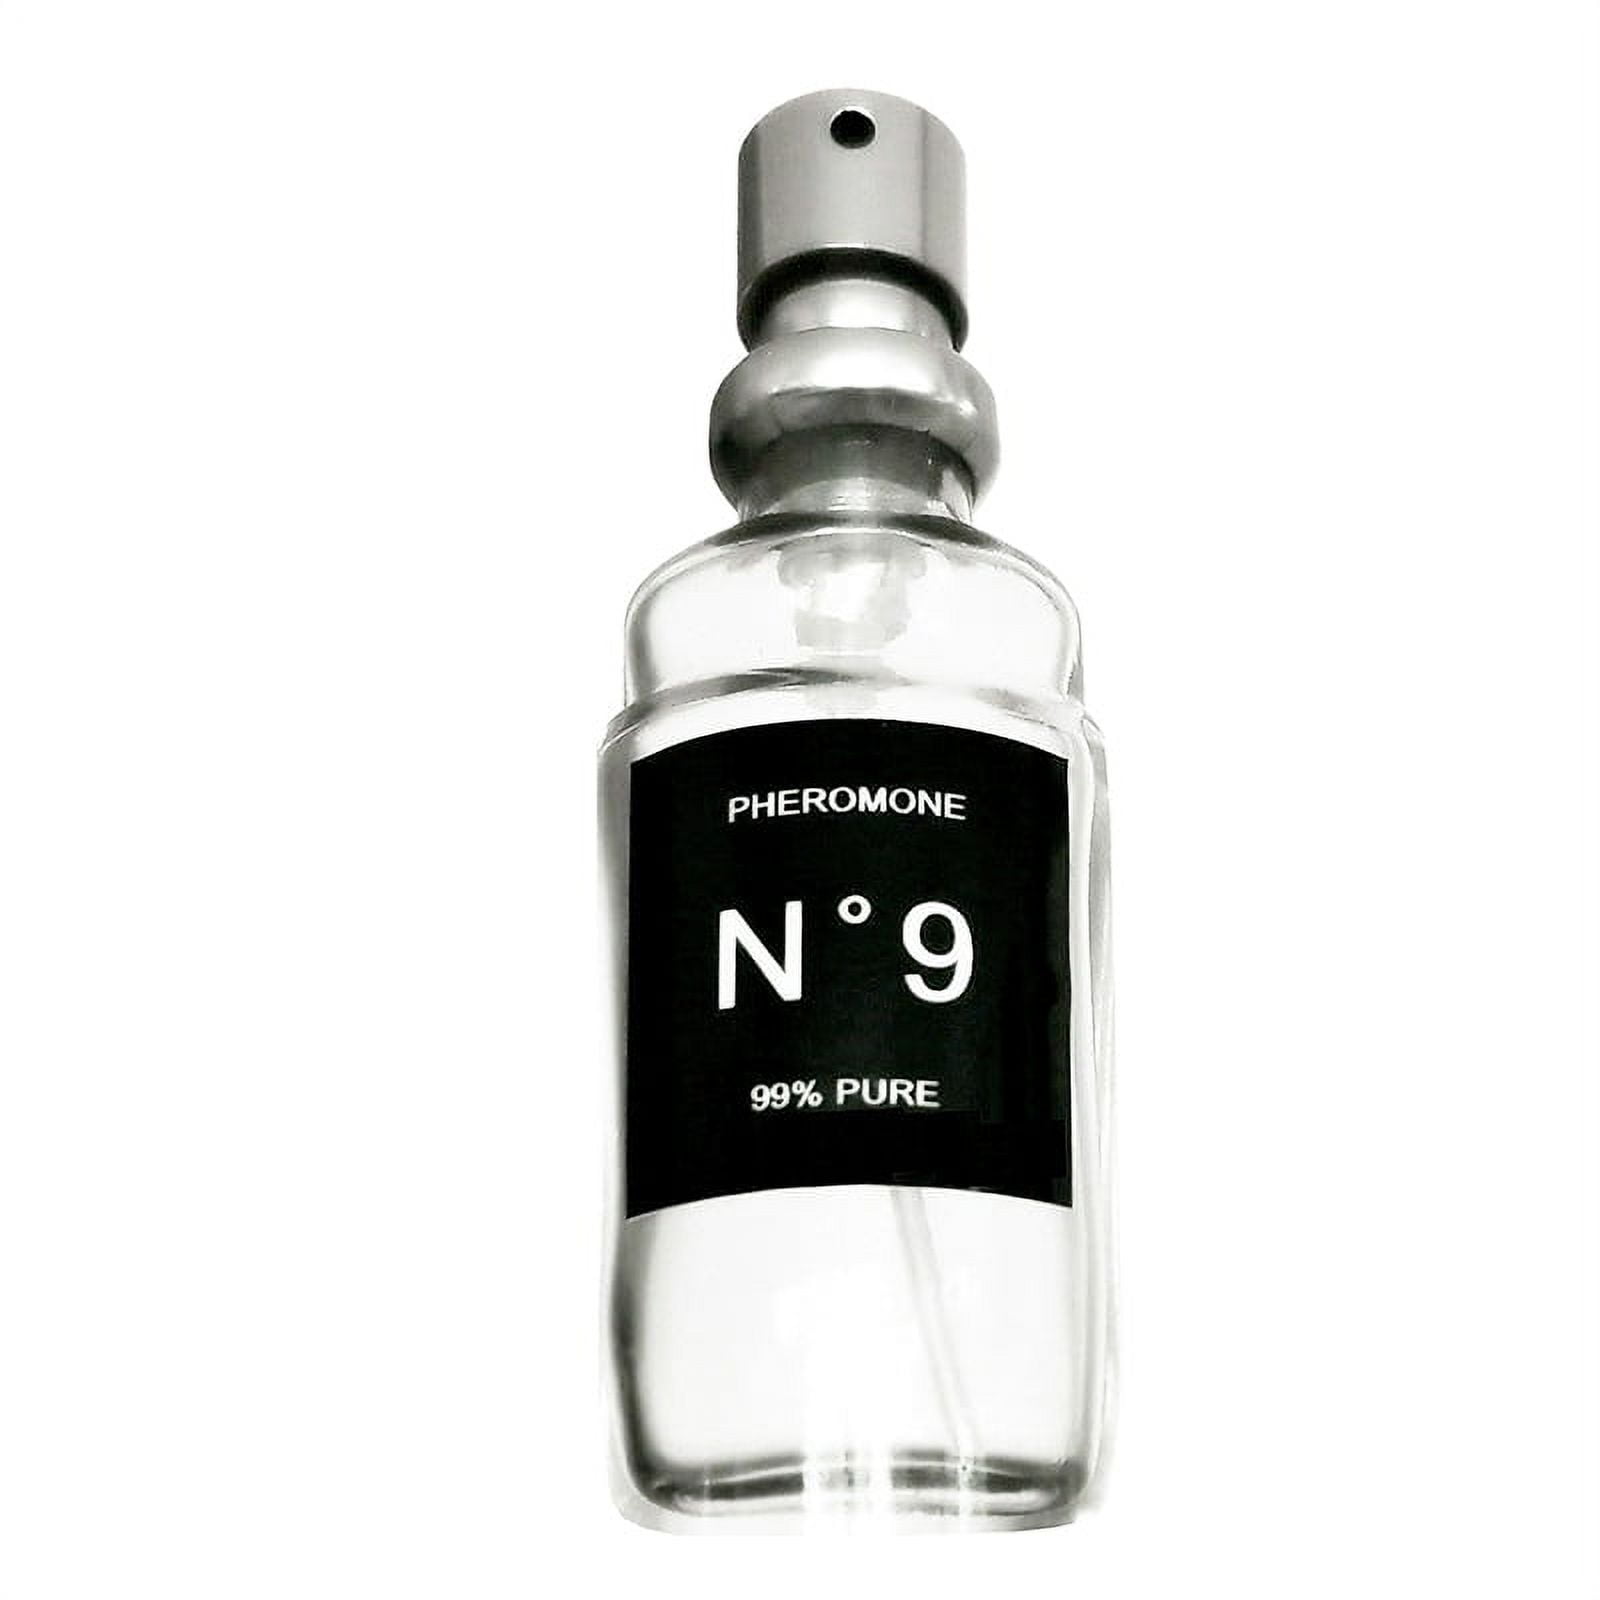  N o 9 Bask Pheromone Perfume (5 ml) for Women to Attract Men -  99 Percent Pure Pheromones Infused Cologne Spray for Her–Concentrated  Female Feromone for Love Attraction – White